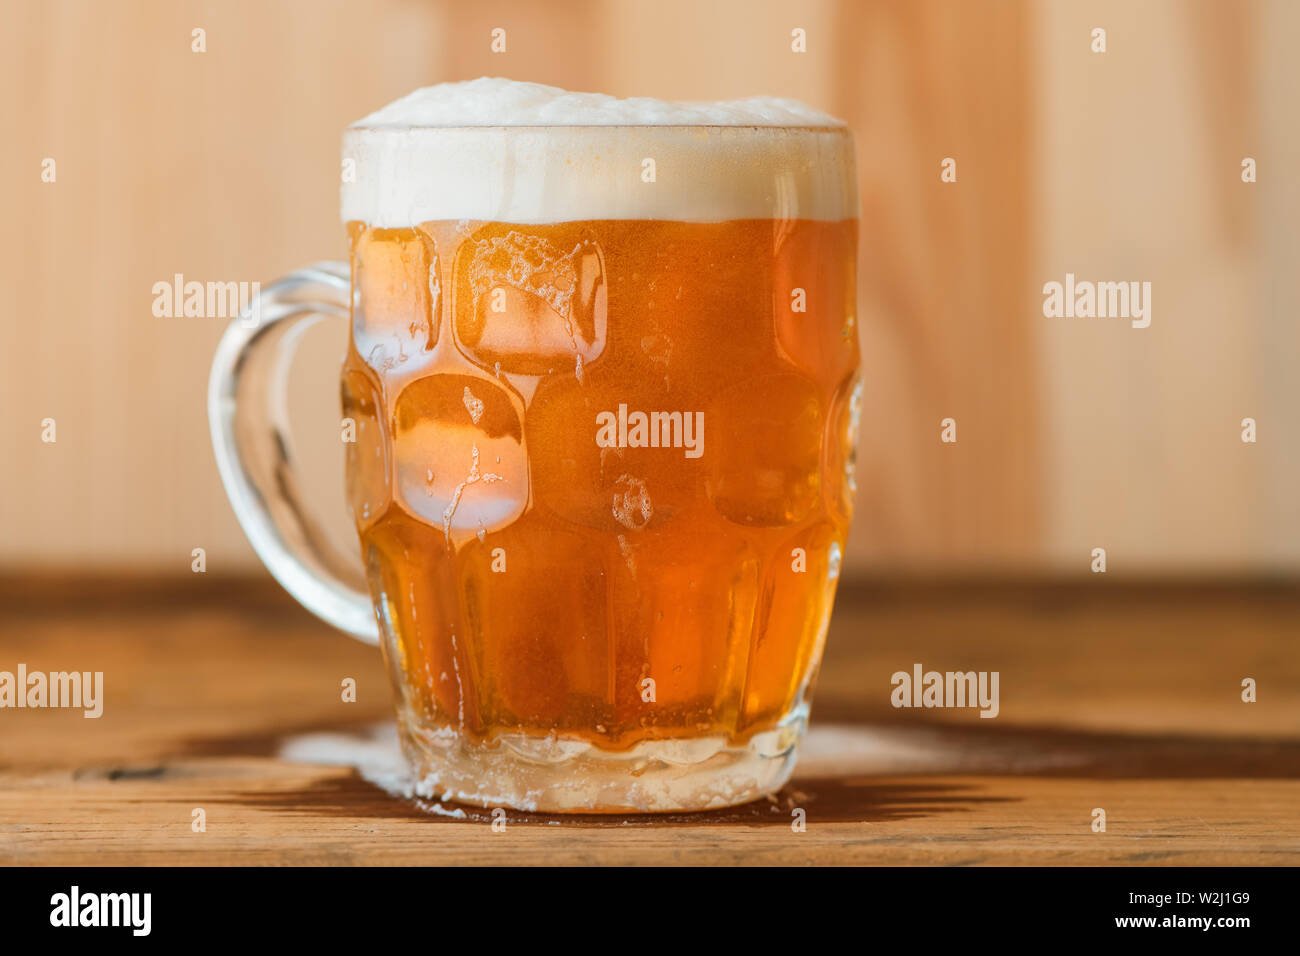 Beer mug on bar counter, single drinking glass with fresh alcohol beverage Stock Photo